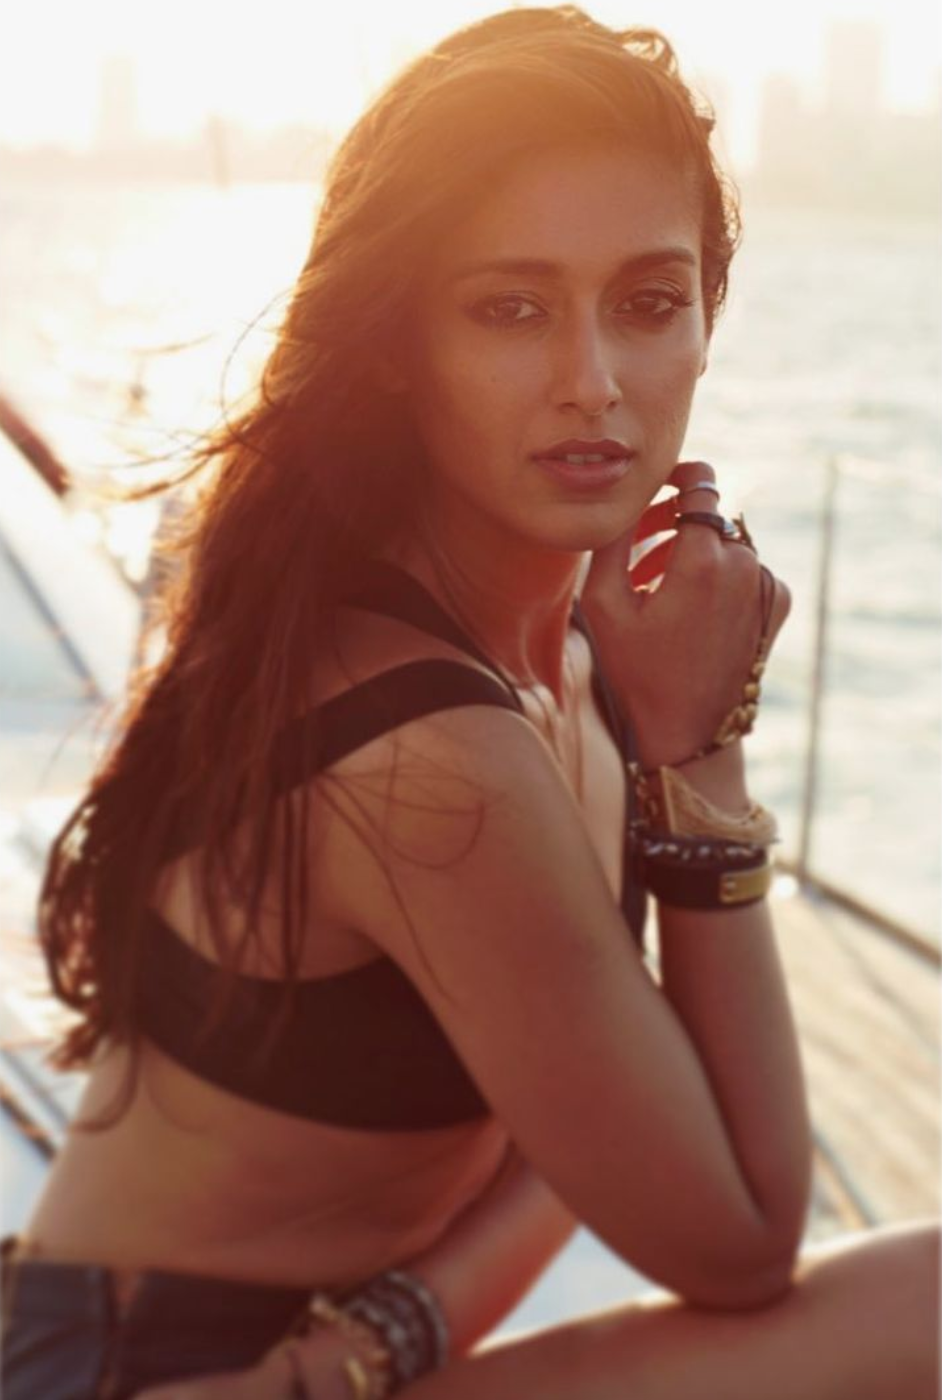 Latest photoshoots of actress Ileana D'Cruz, the queen of sass & style